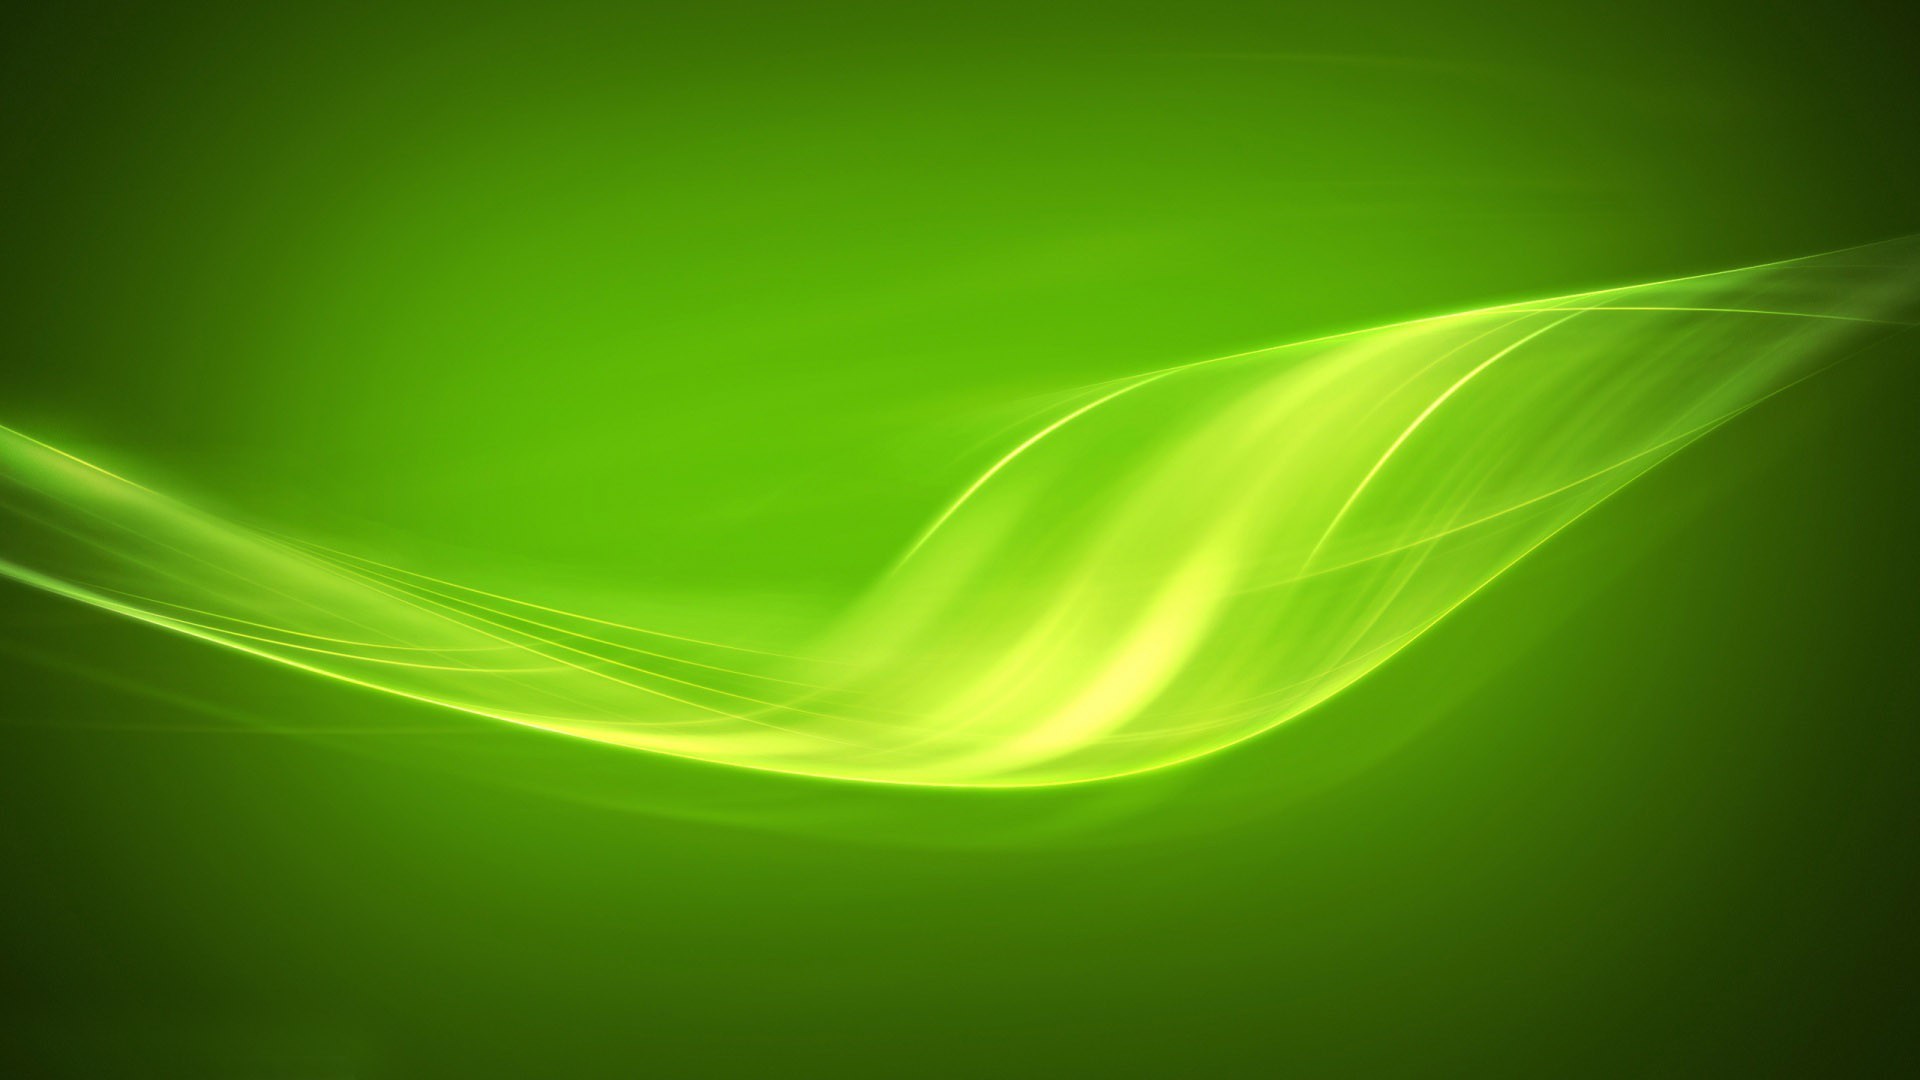 Neon Green Desktop Backgrounds with image resolution 1920x1080 pixel. You can make this wallpaper for your Desktop Computer Backgrounds, Mac Wallpapers, Android Lock screen or iPhone Screensavers